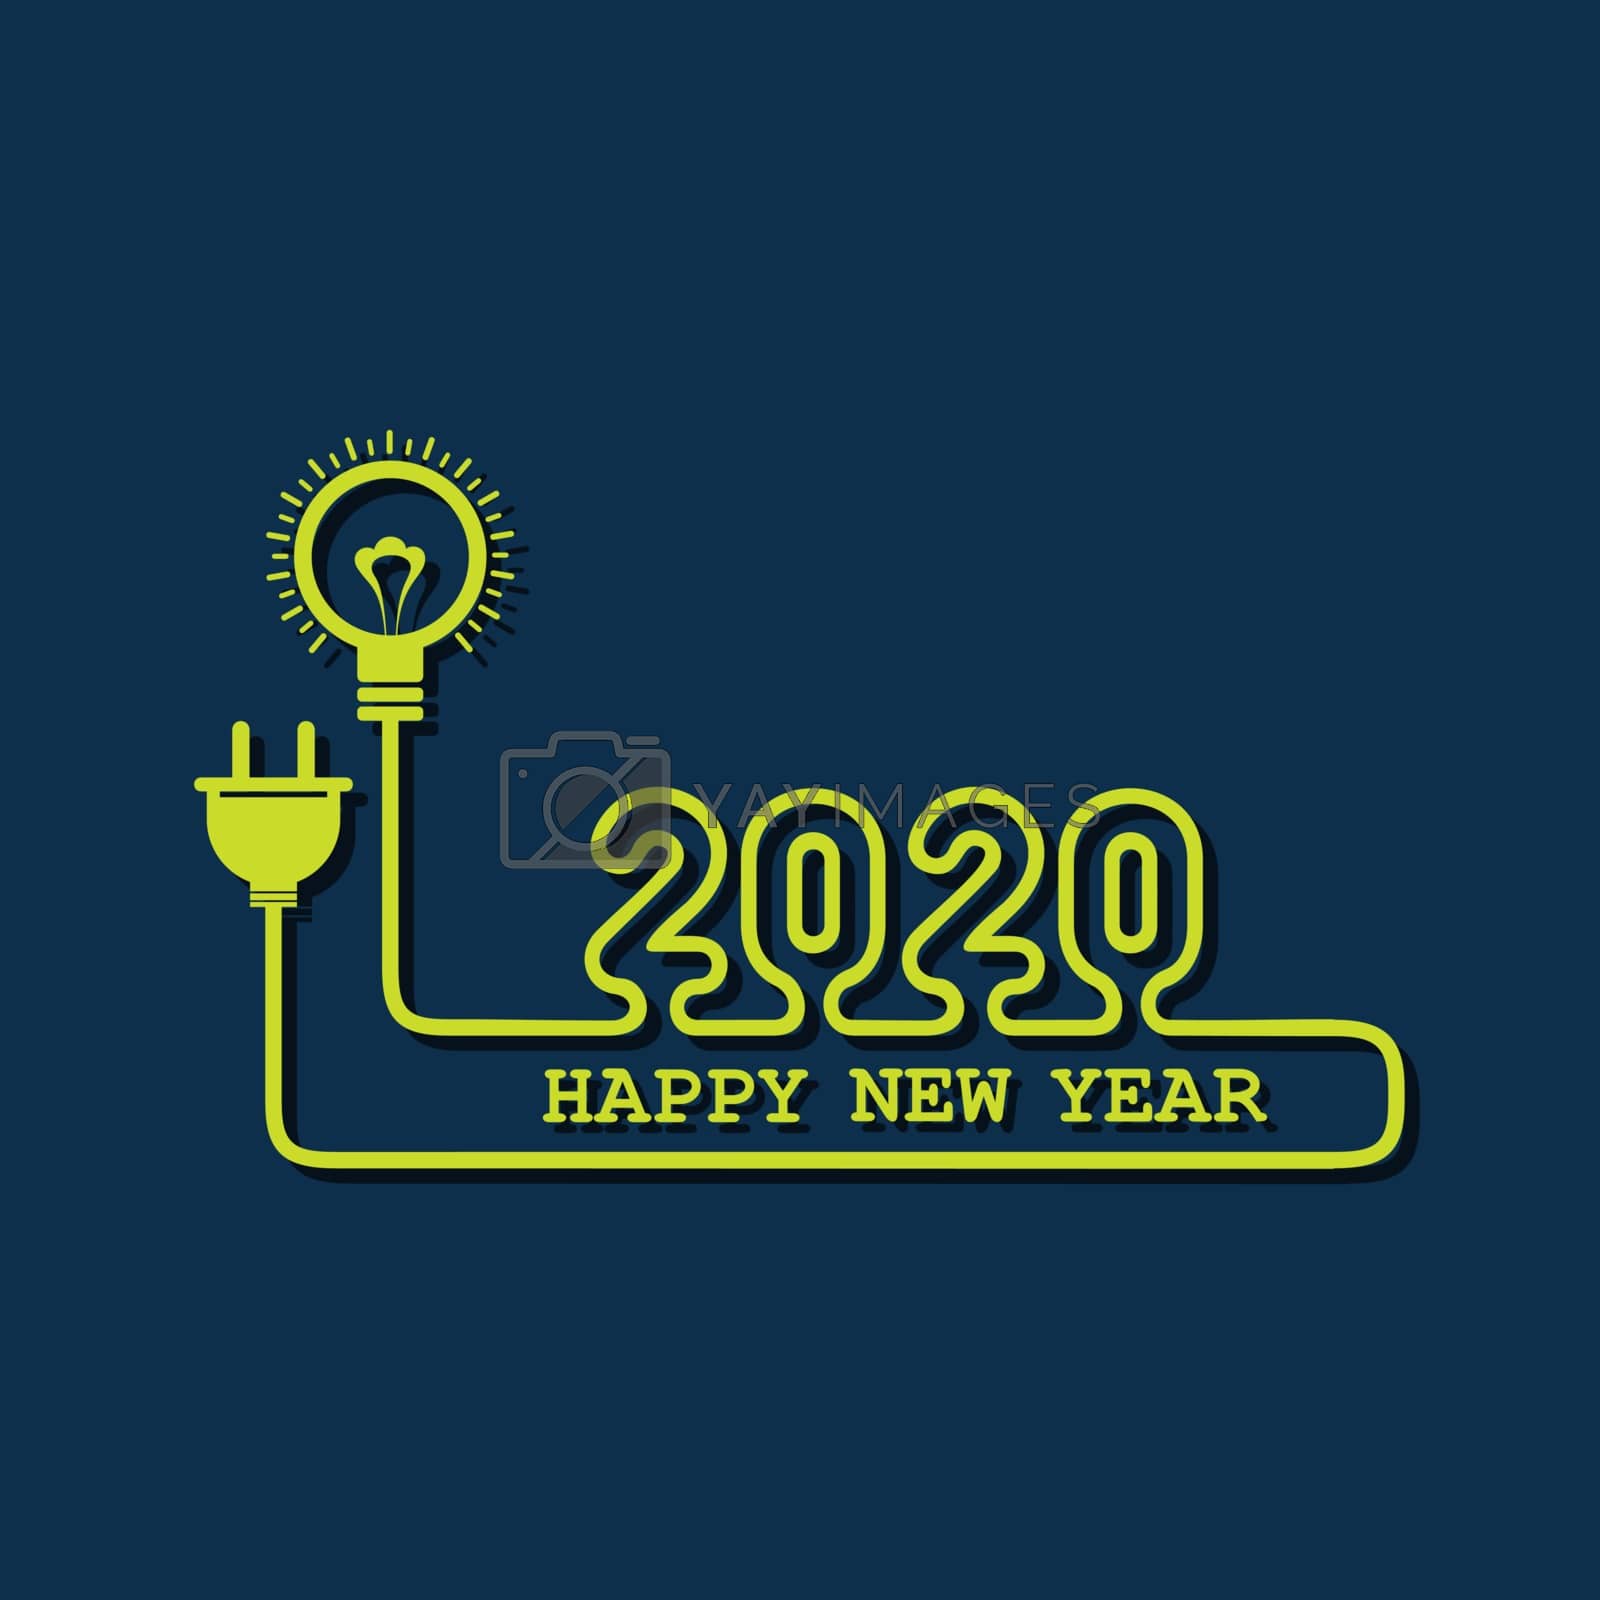 Royalty free image of Illustration of greeting for new year 2020 by graphicsdunia4you